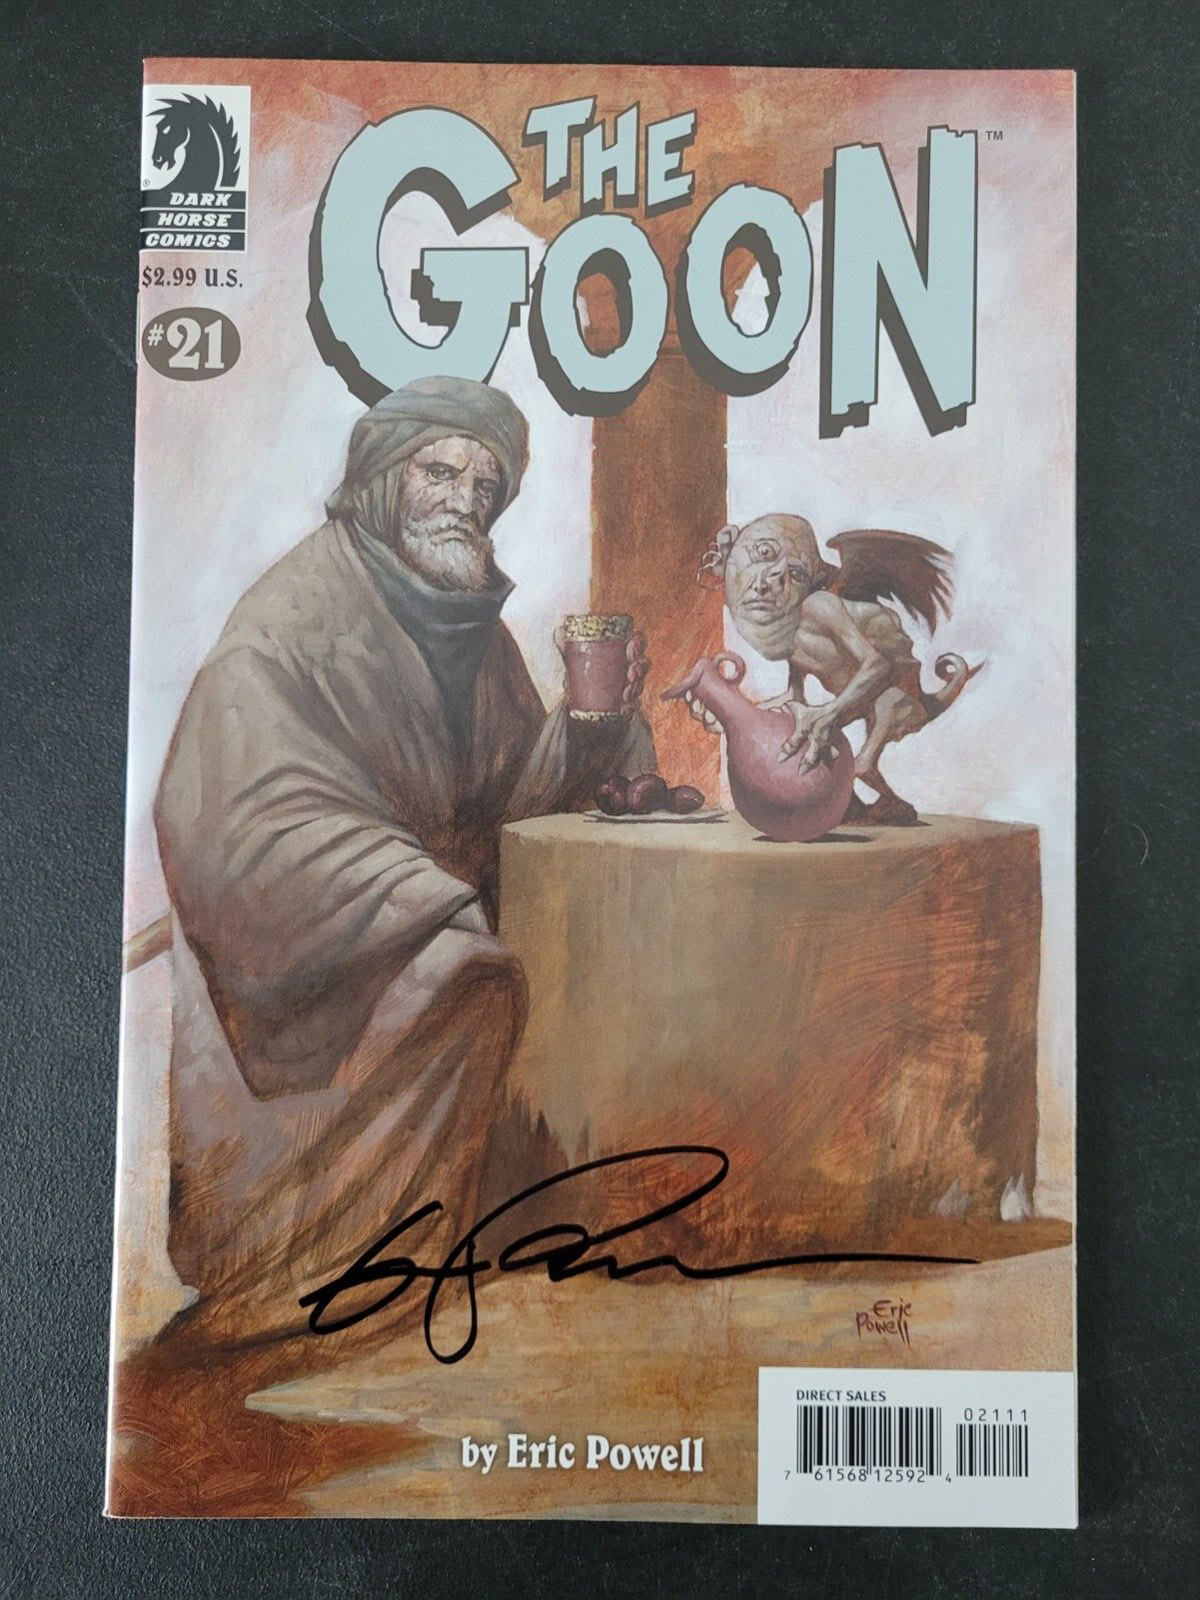 THE GOON #21 (2008) DARK HORSE COMICS AUTOGRAPHED/SIGNED By ERIC POWELL